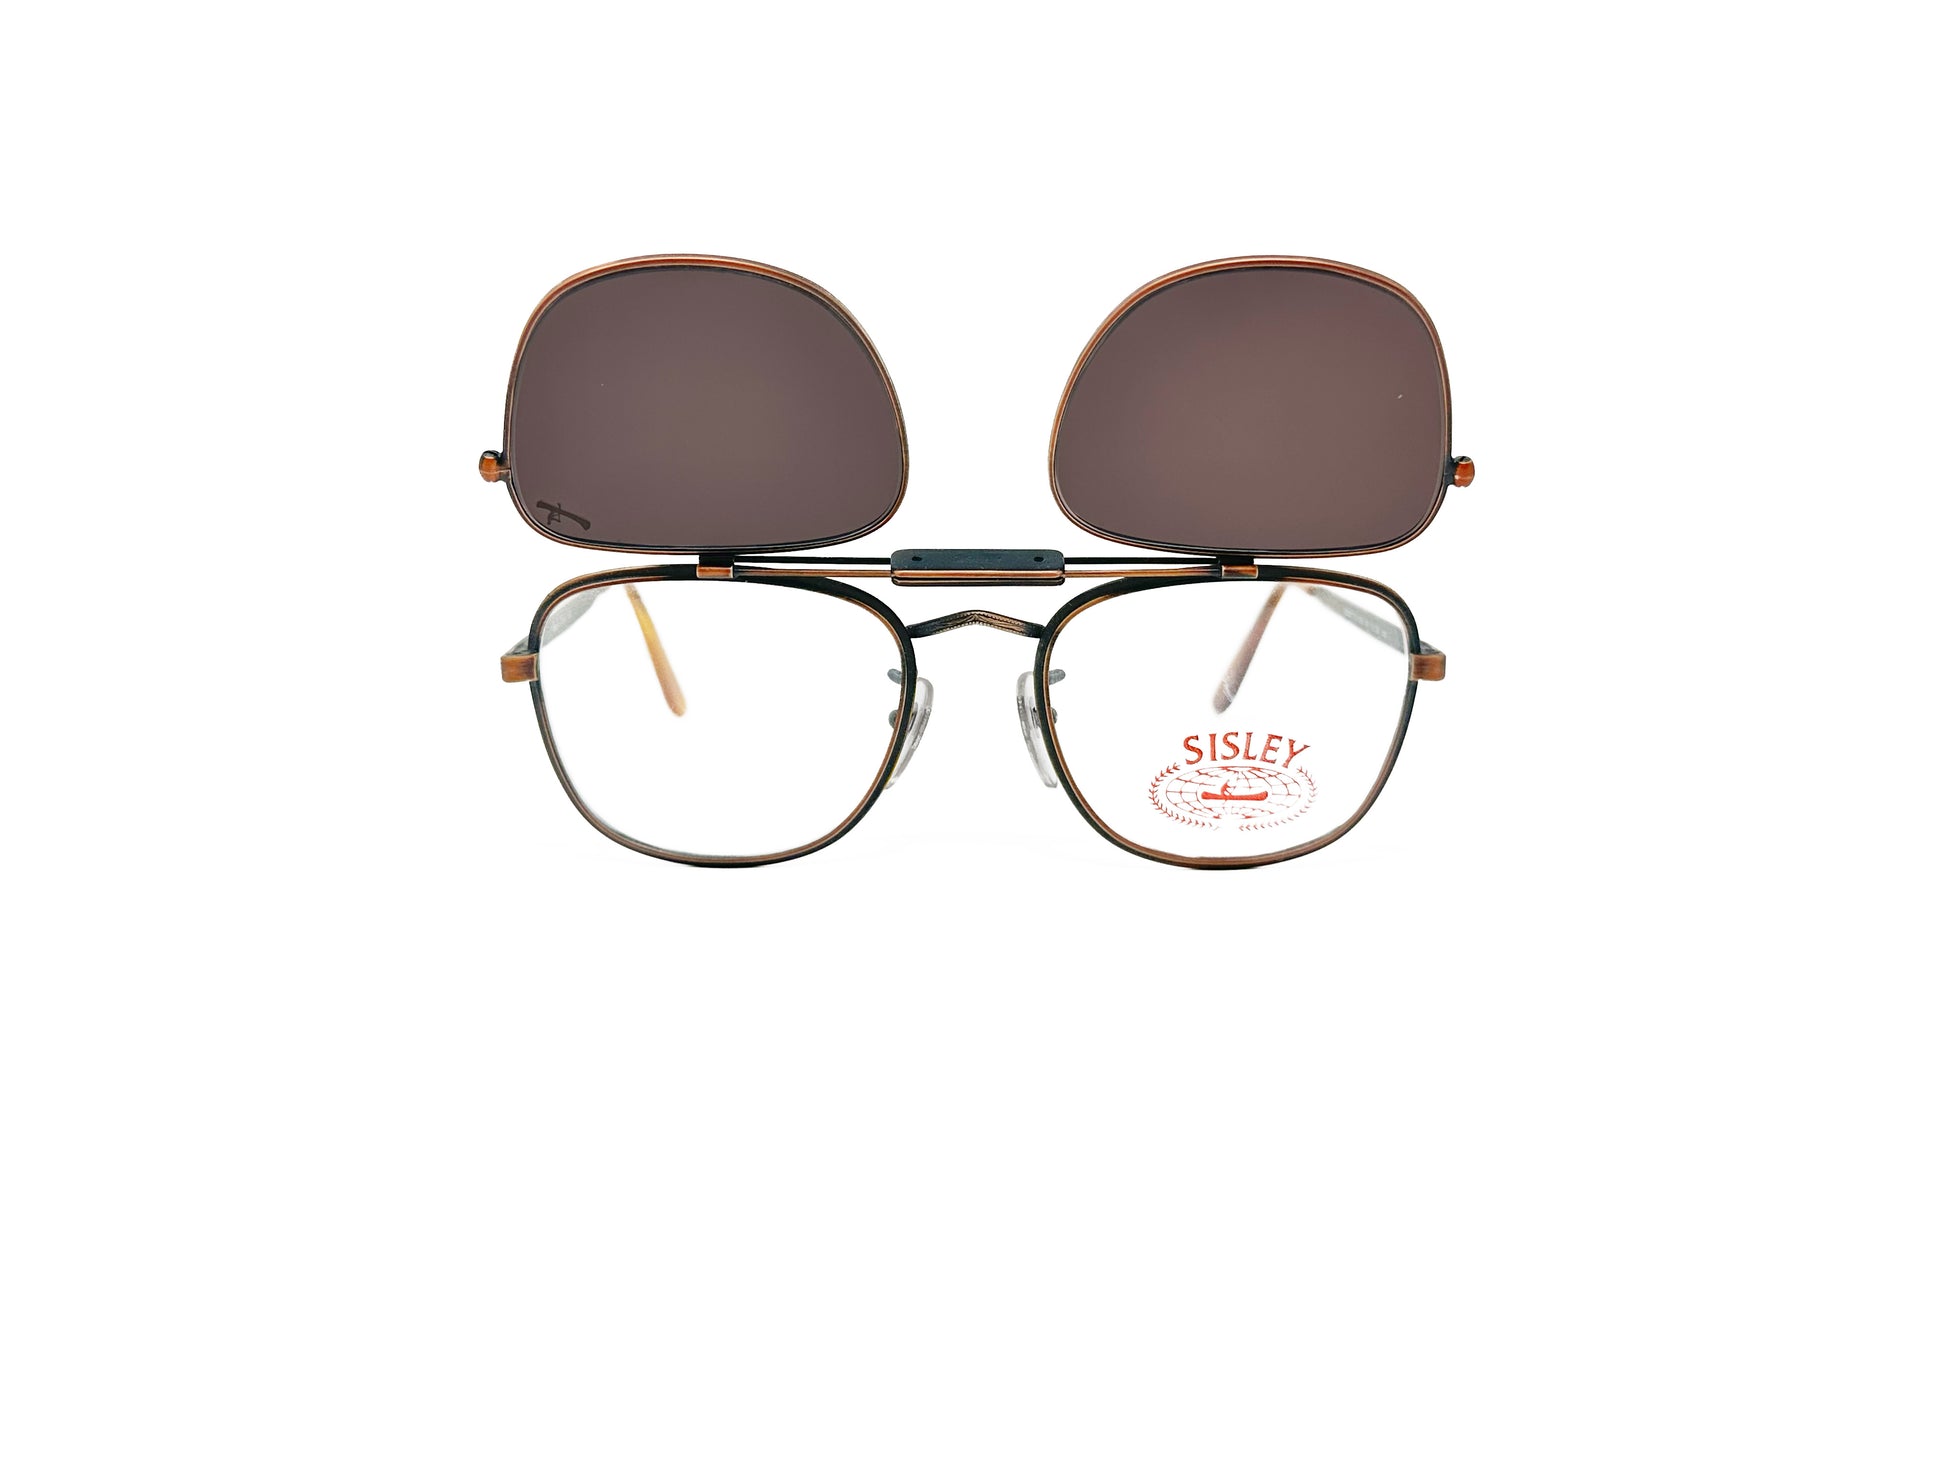 Sisley rounded-square flip-up sunglass with bar across top. Model: SL4. Color: 009 - Bronze. Front view. Shades flipped up.